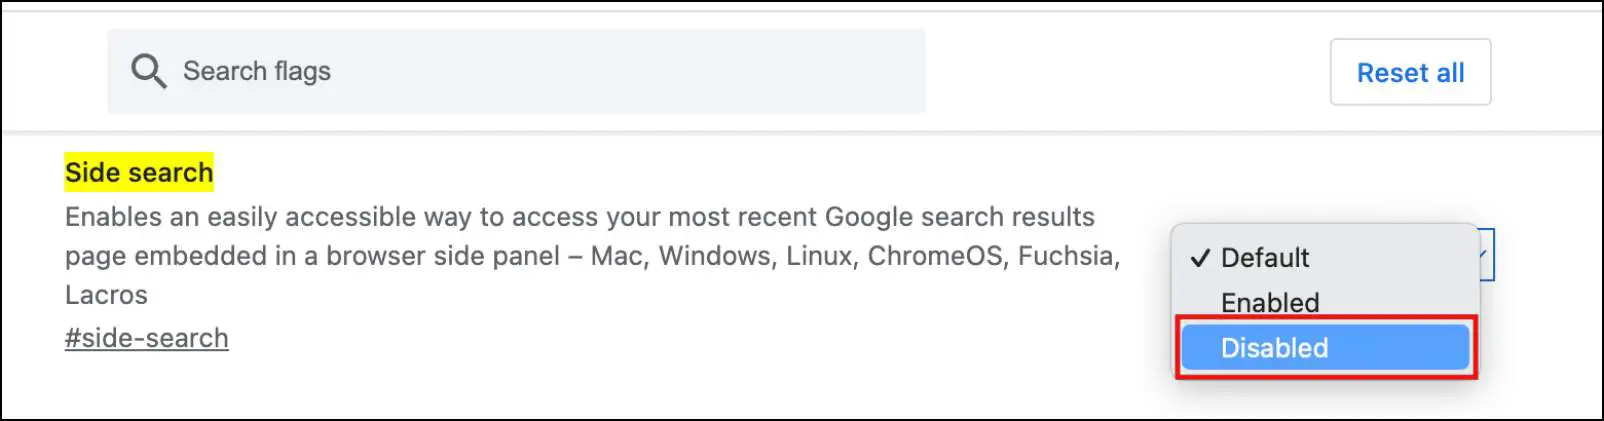 Disable-Side-Search-Flag-Chrome